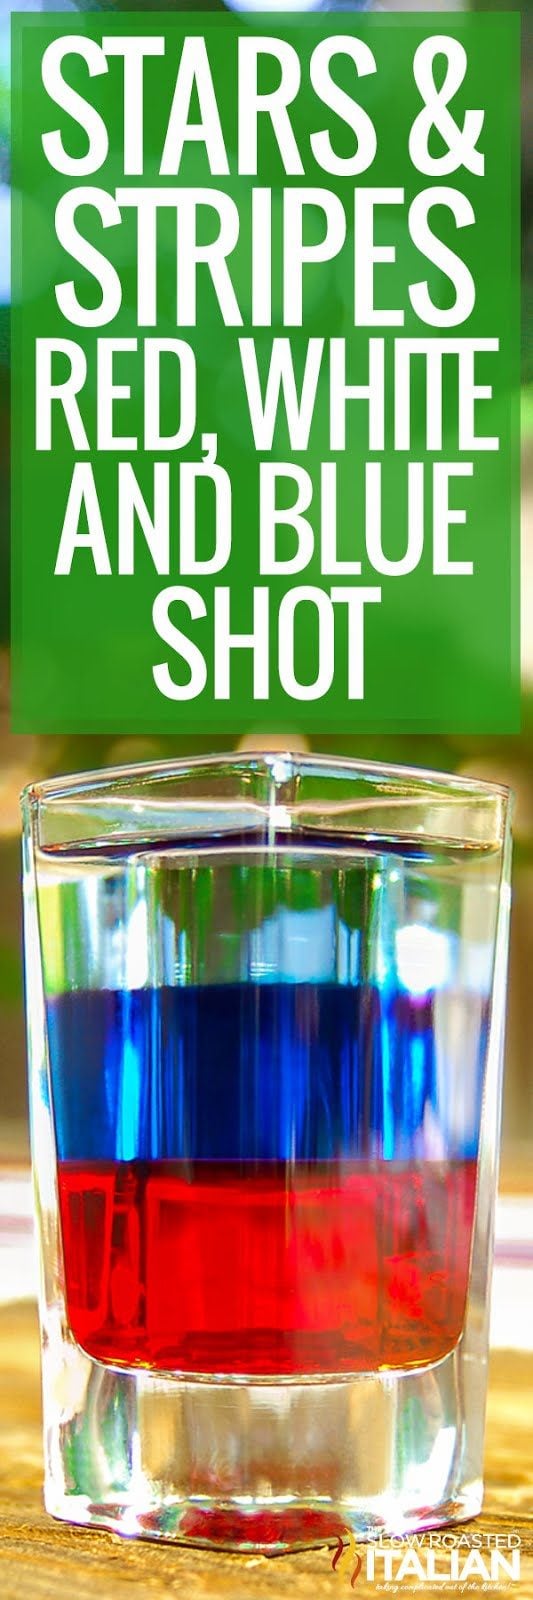 red white and blue shot-pin